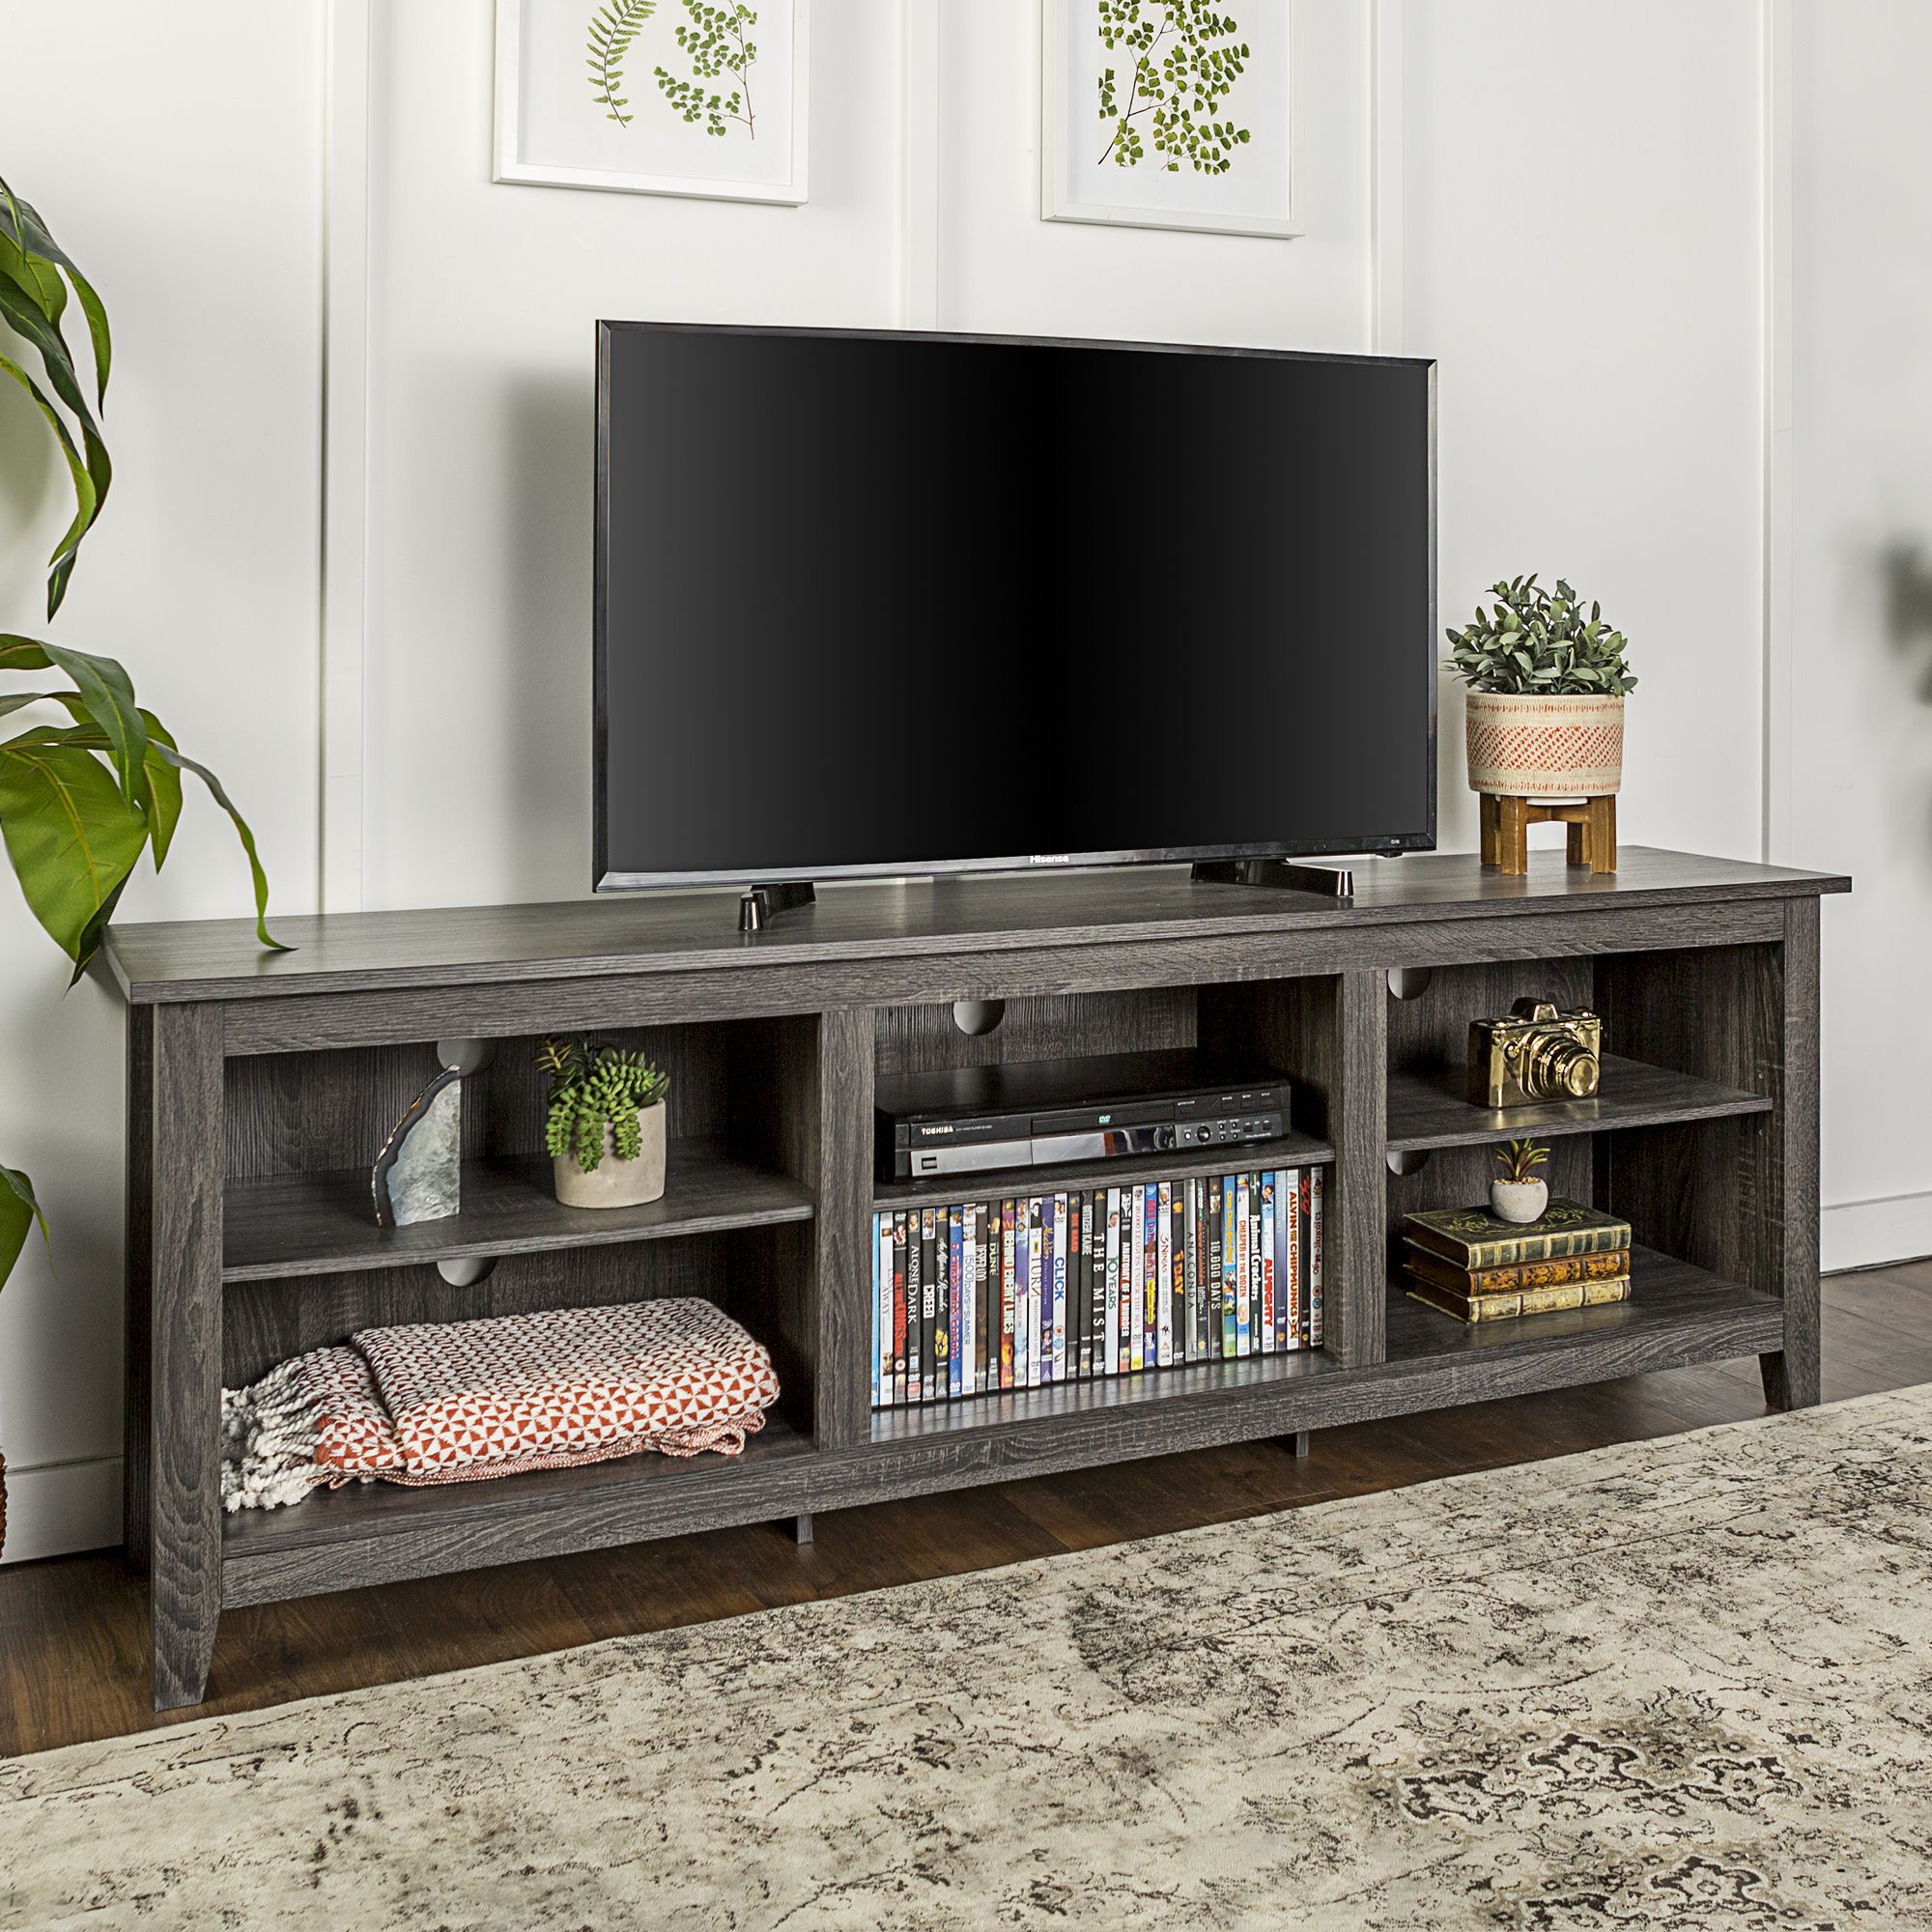 70" Wood Media Tv Stand Storage Console – Charcoal 842158106131 | Ebay Intended For 110" Tvs Wood Tv Cabinet With Drawers (View 19 of 20)